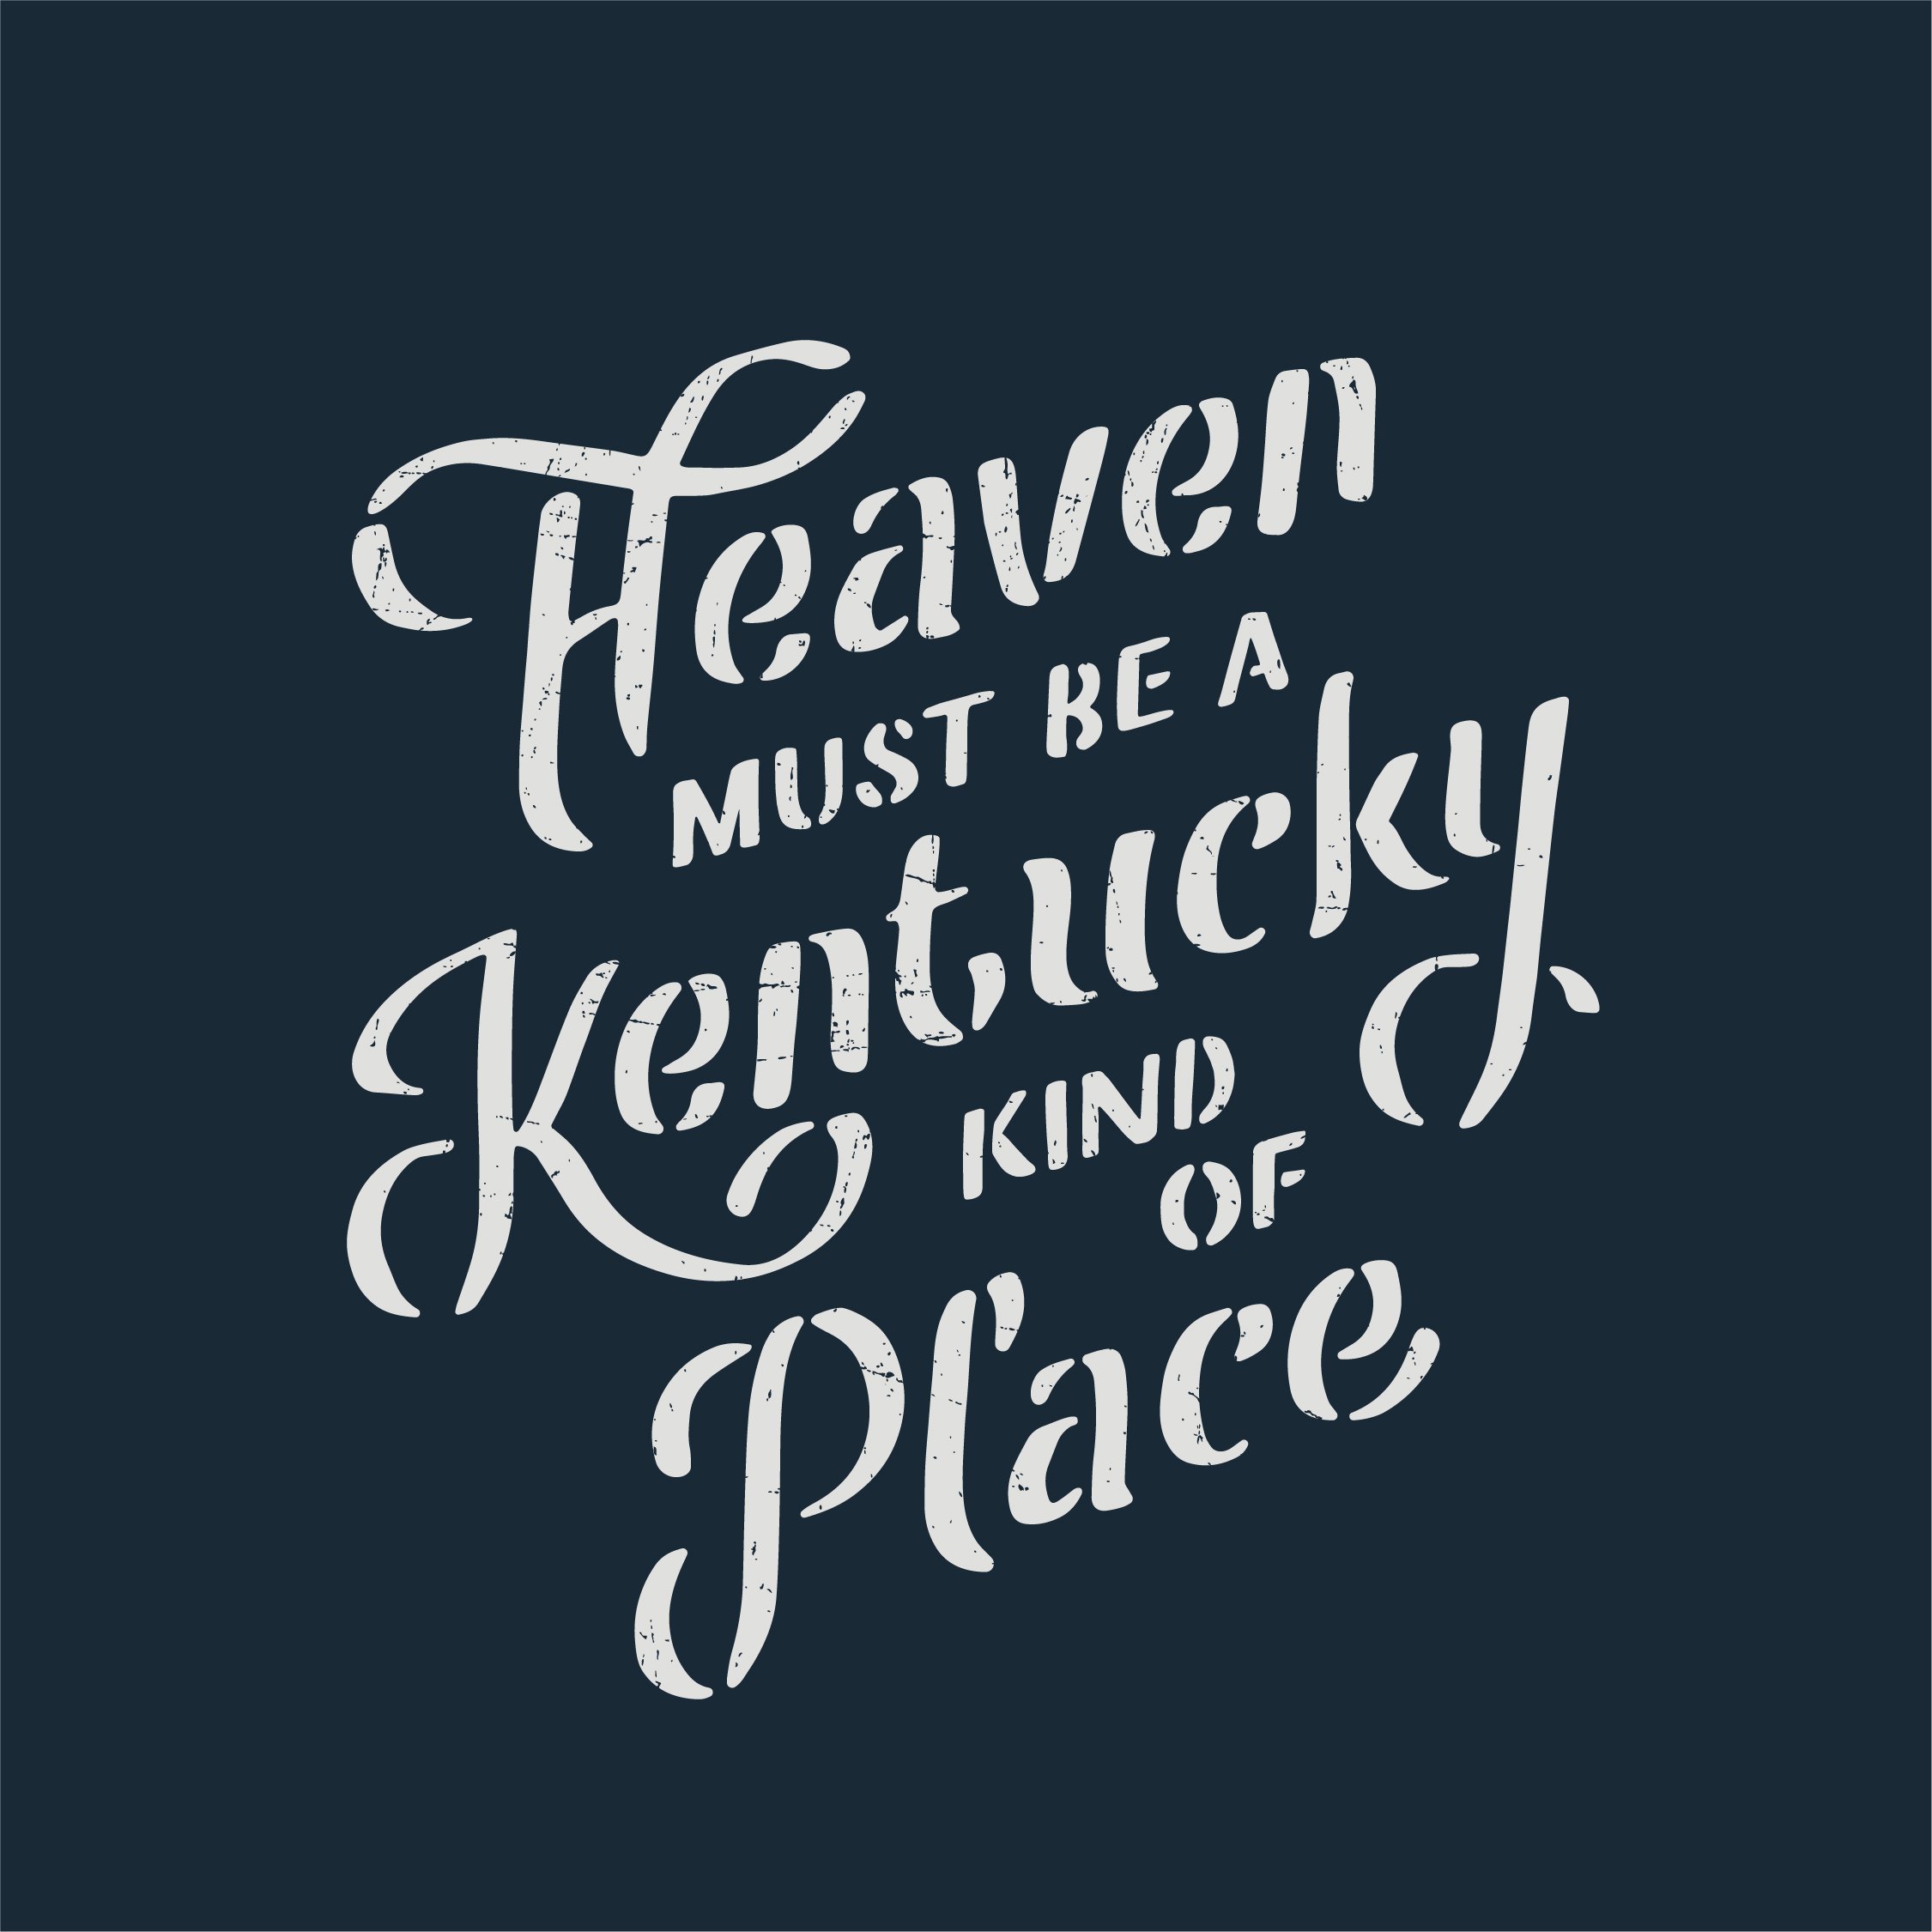 Heaven Must Be A Kentucky Kind Of Place